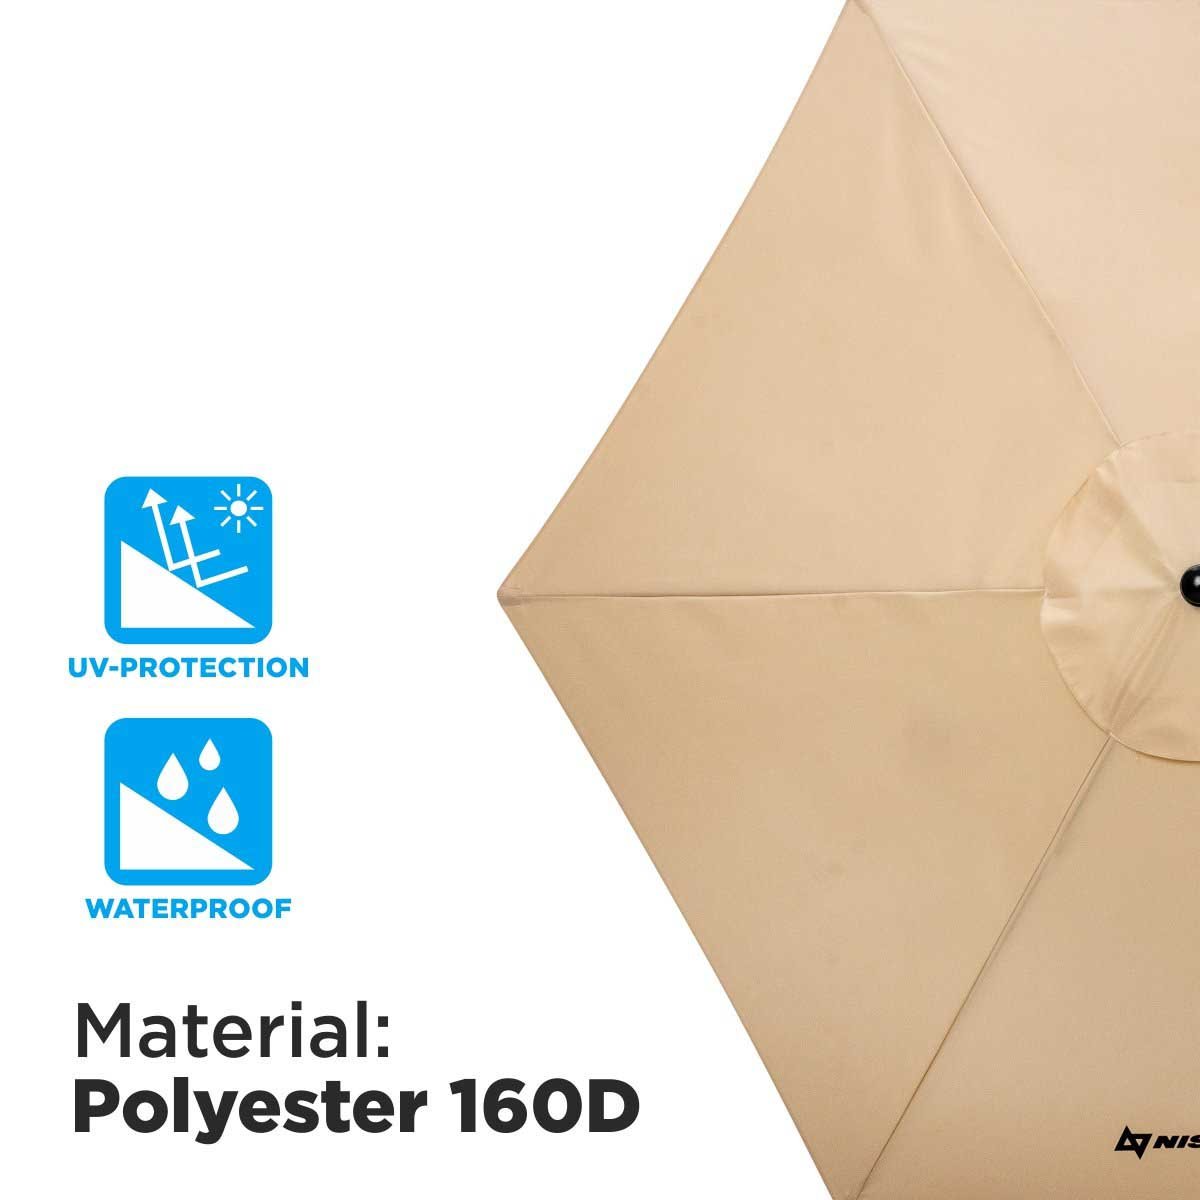 Patio Garden Large Folding Tilting Umbrella, is made of waterproof polyester 160D, featuring UV protection